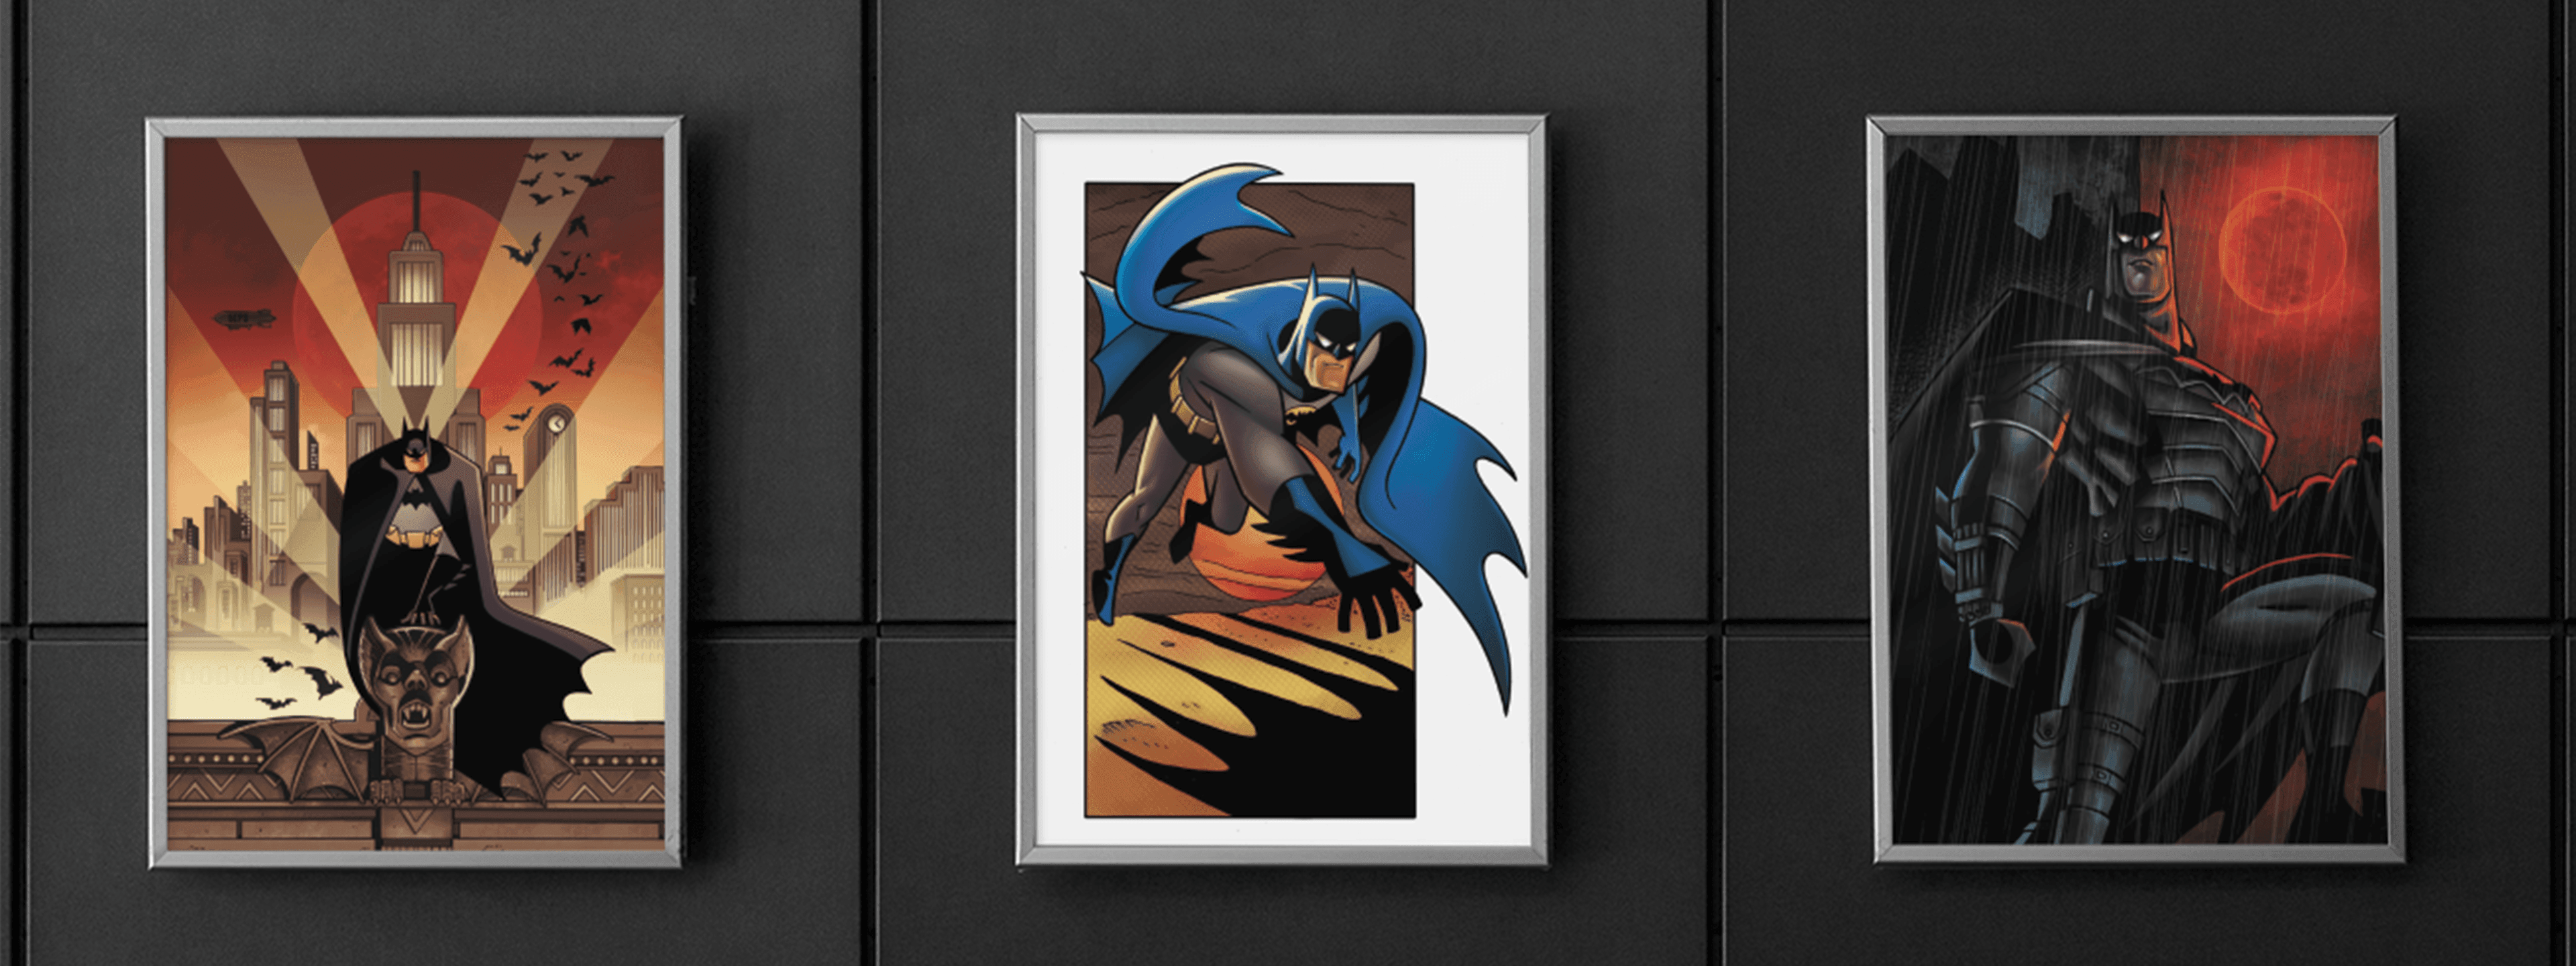 Batman: The Animated Series 30th Anniversary Limited Edition Art Prints